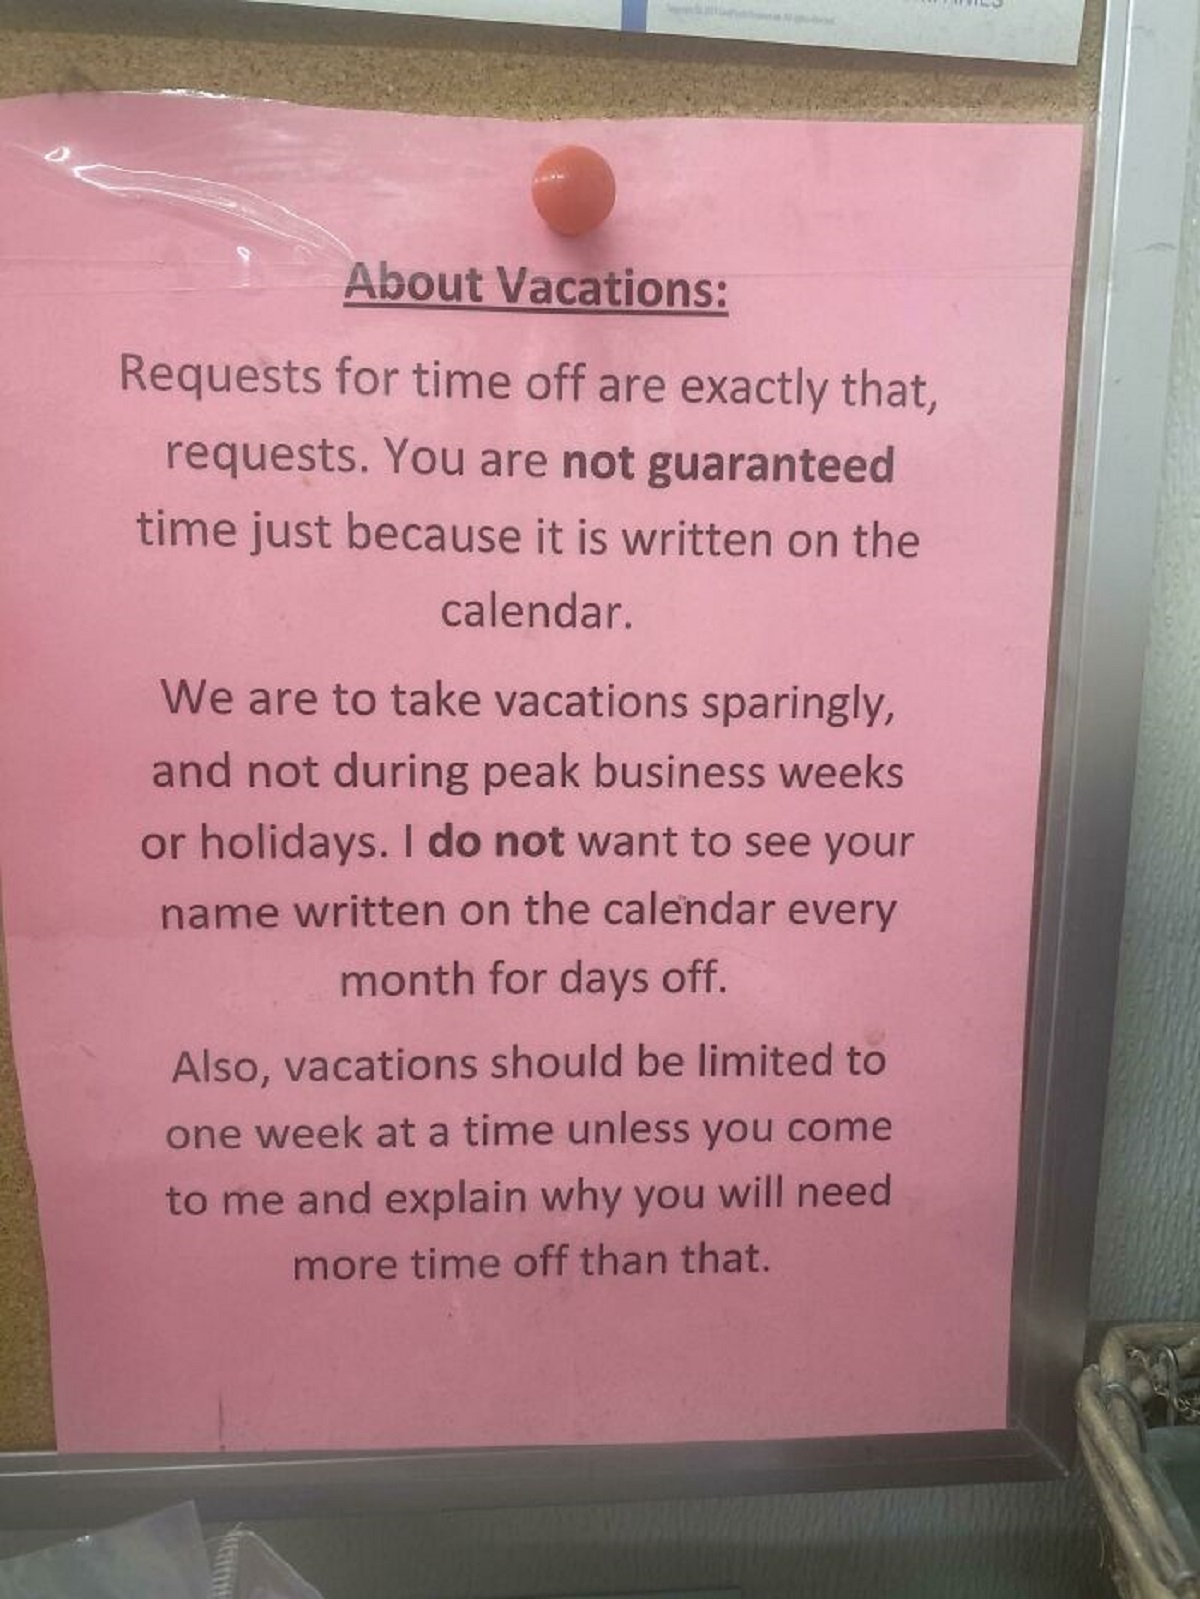 document - About Vacations Requests for time off are exactly that, requests. You are not guaranteed time just because it is written on the calendar. We are to take vacations sparingly, and not during peak business weeks or holidays. I do not want to see y